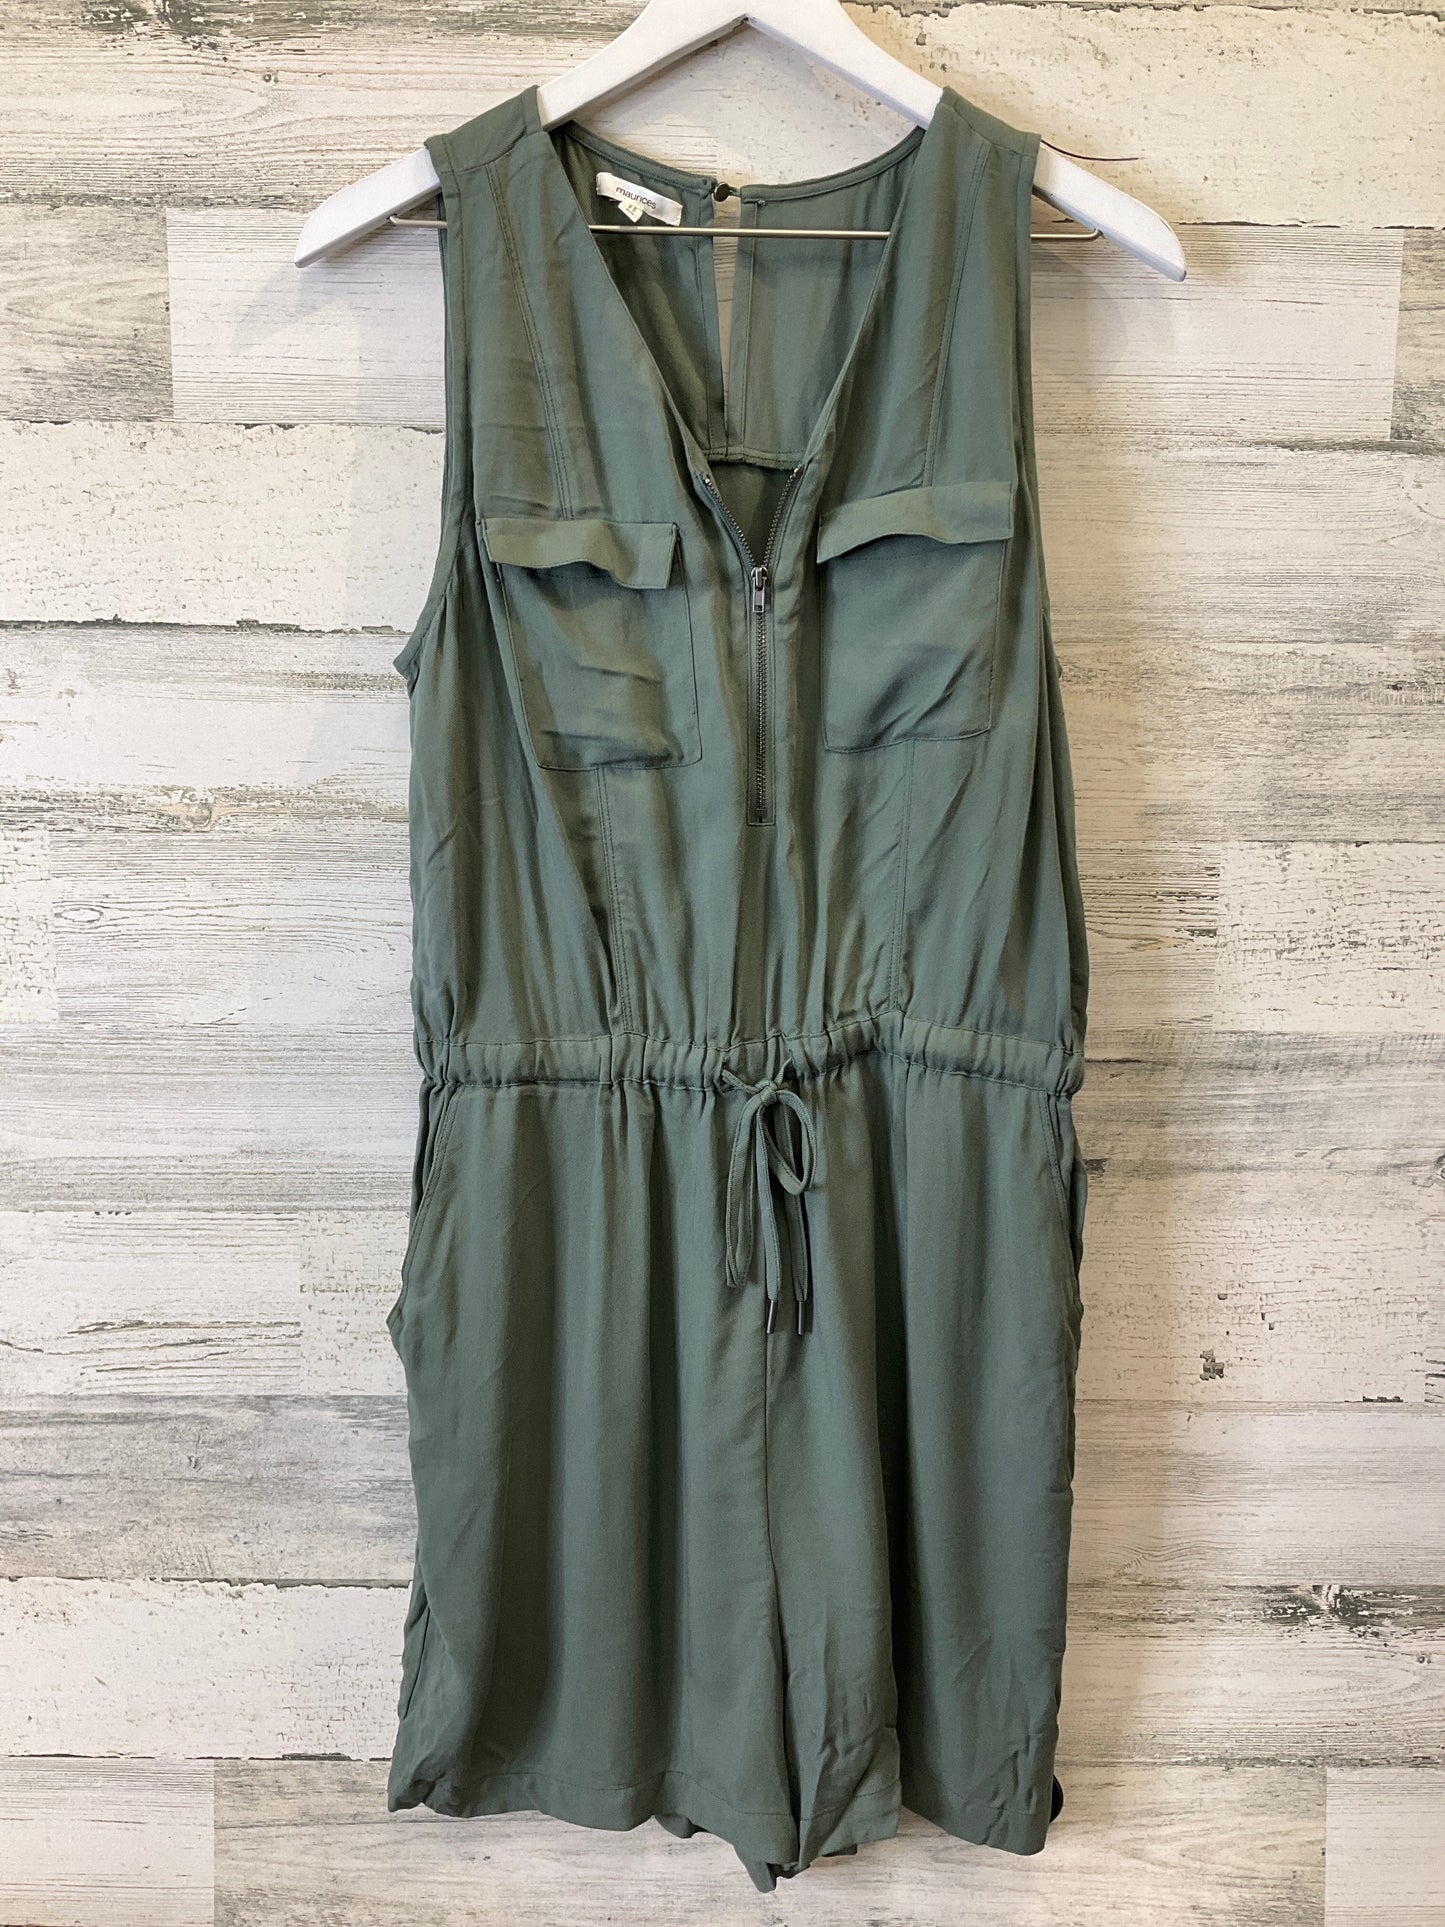 Green Romper Maurices, Size M